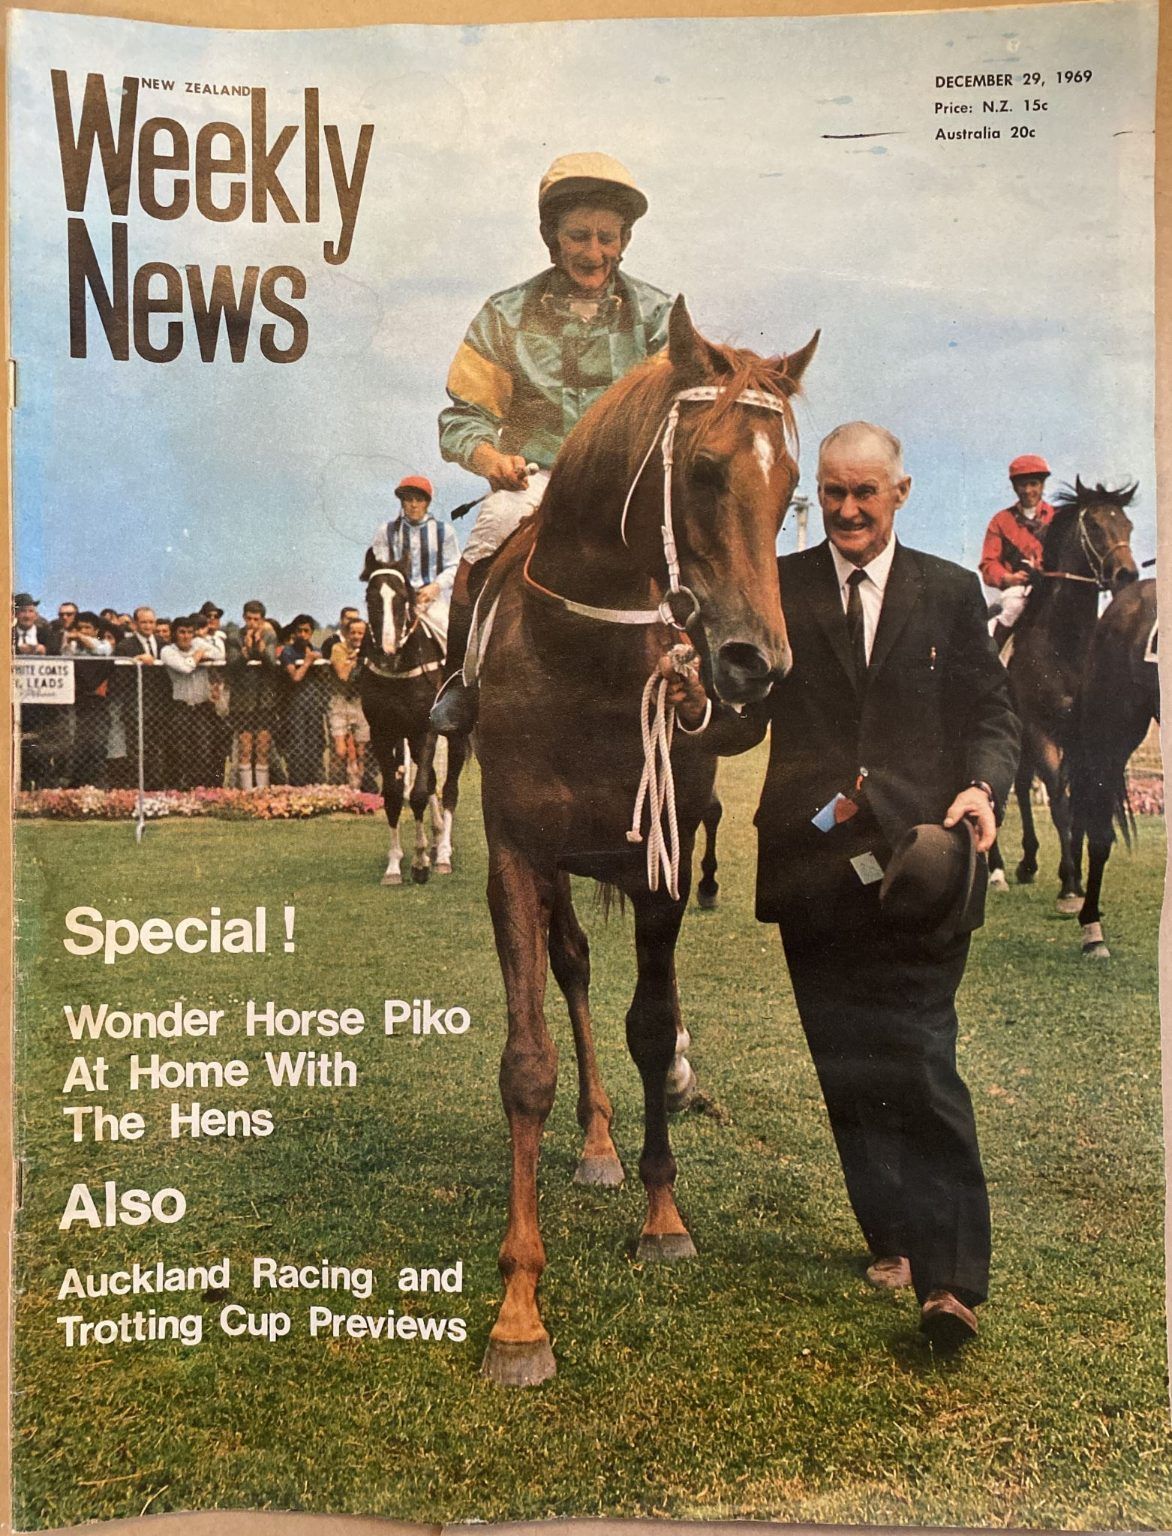 OLD NEWSPAPER: New Zealand Weekly News, No. 5535, 29 December 1969